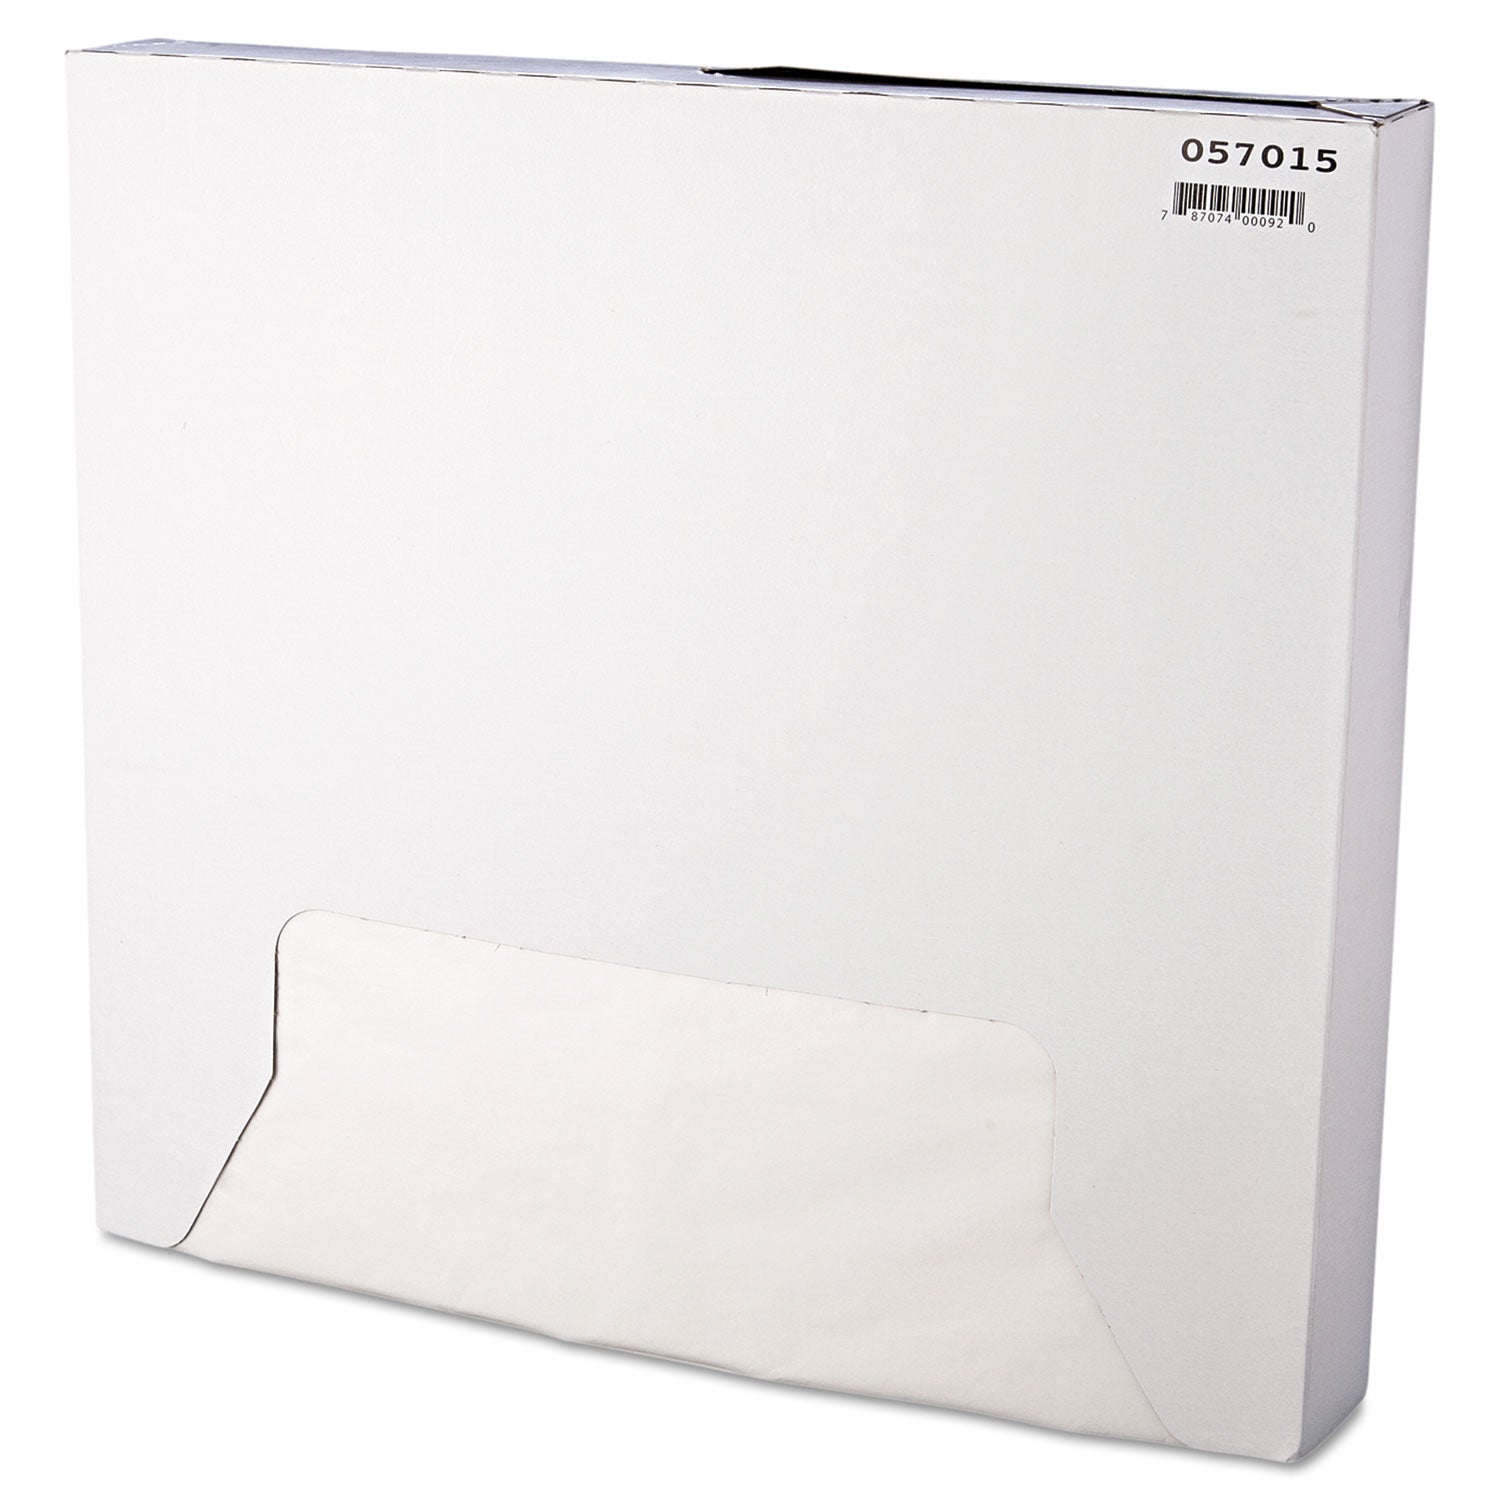 Grease-Resistant Paper Wraps and Liners, 15 x 16, White, 1,000/Box, 3 Boxes/Carton - 